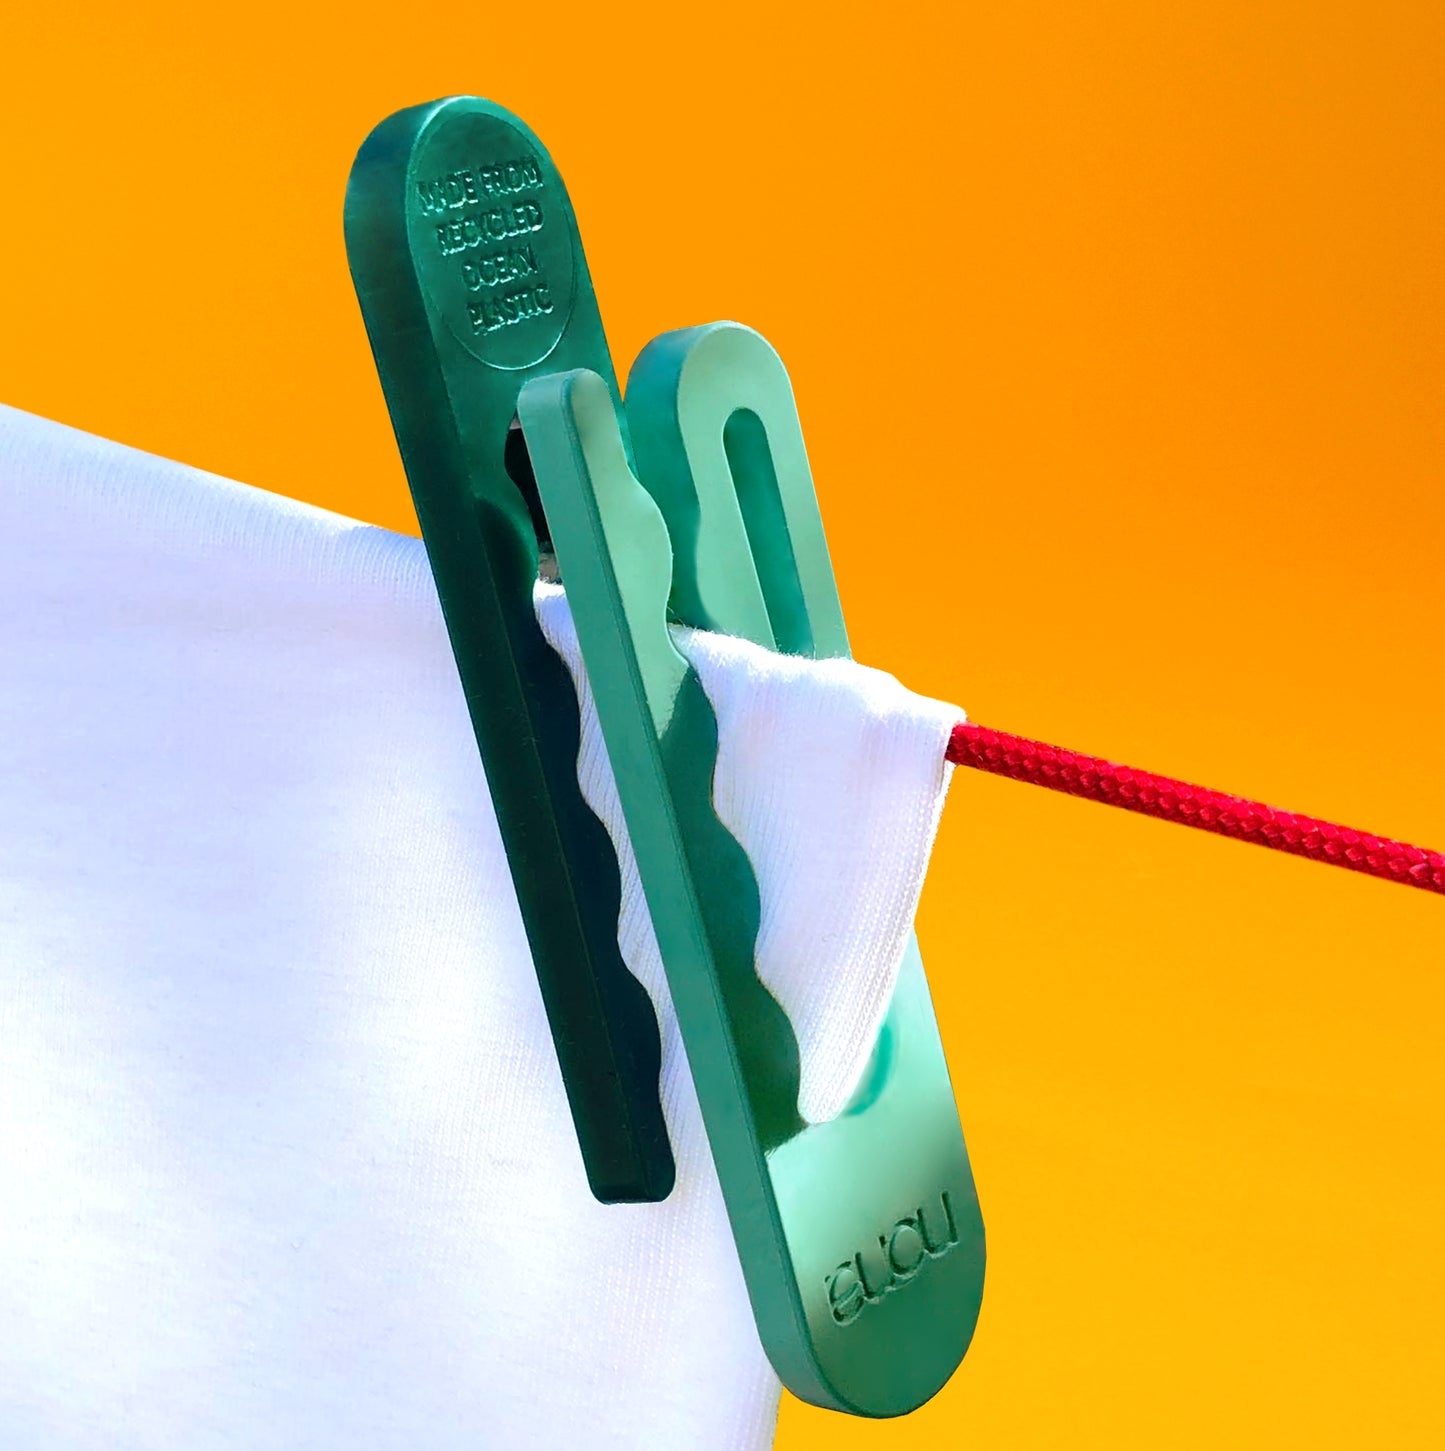 A light green recycled clothespin securing the corner of white fabric onto a red clothesline and a dark green clothespin pinned in the opposite direction